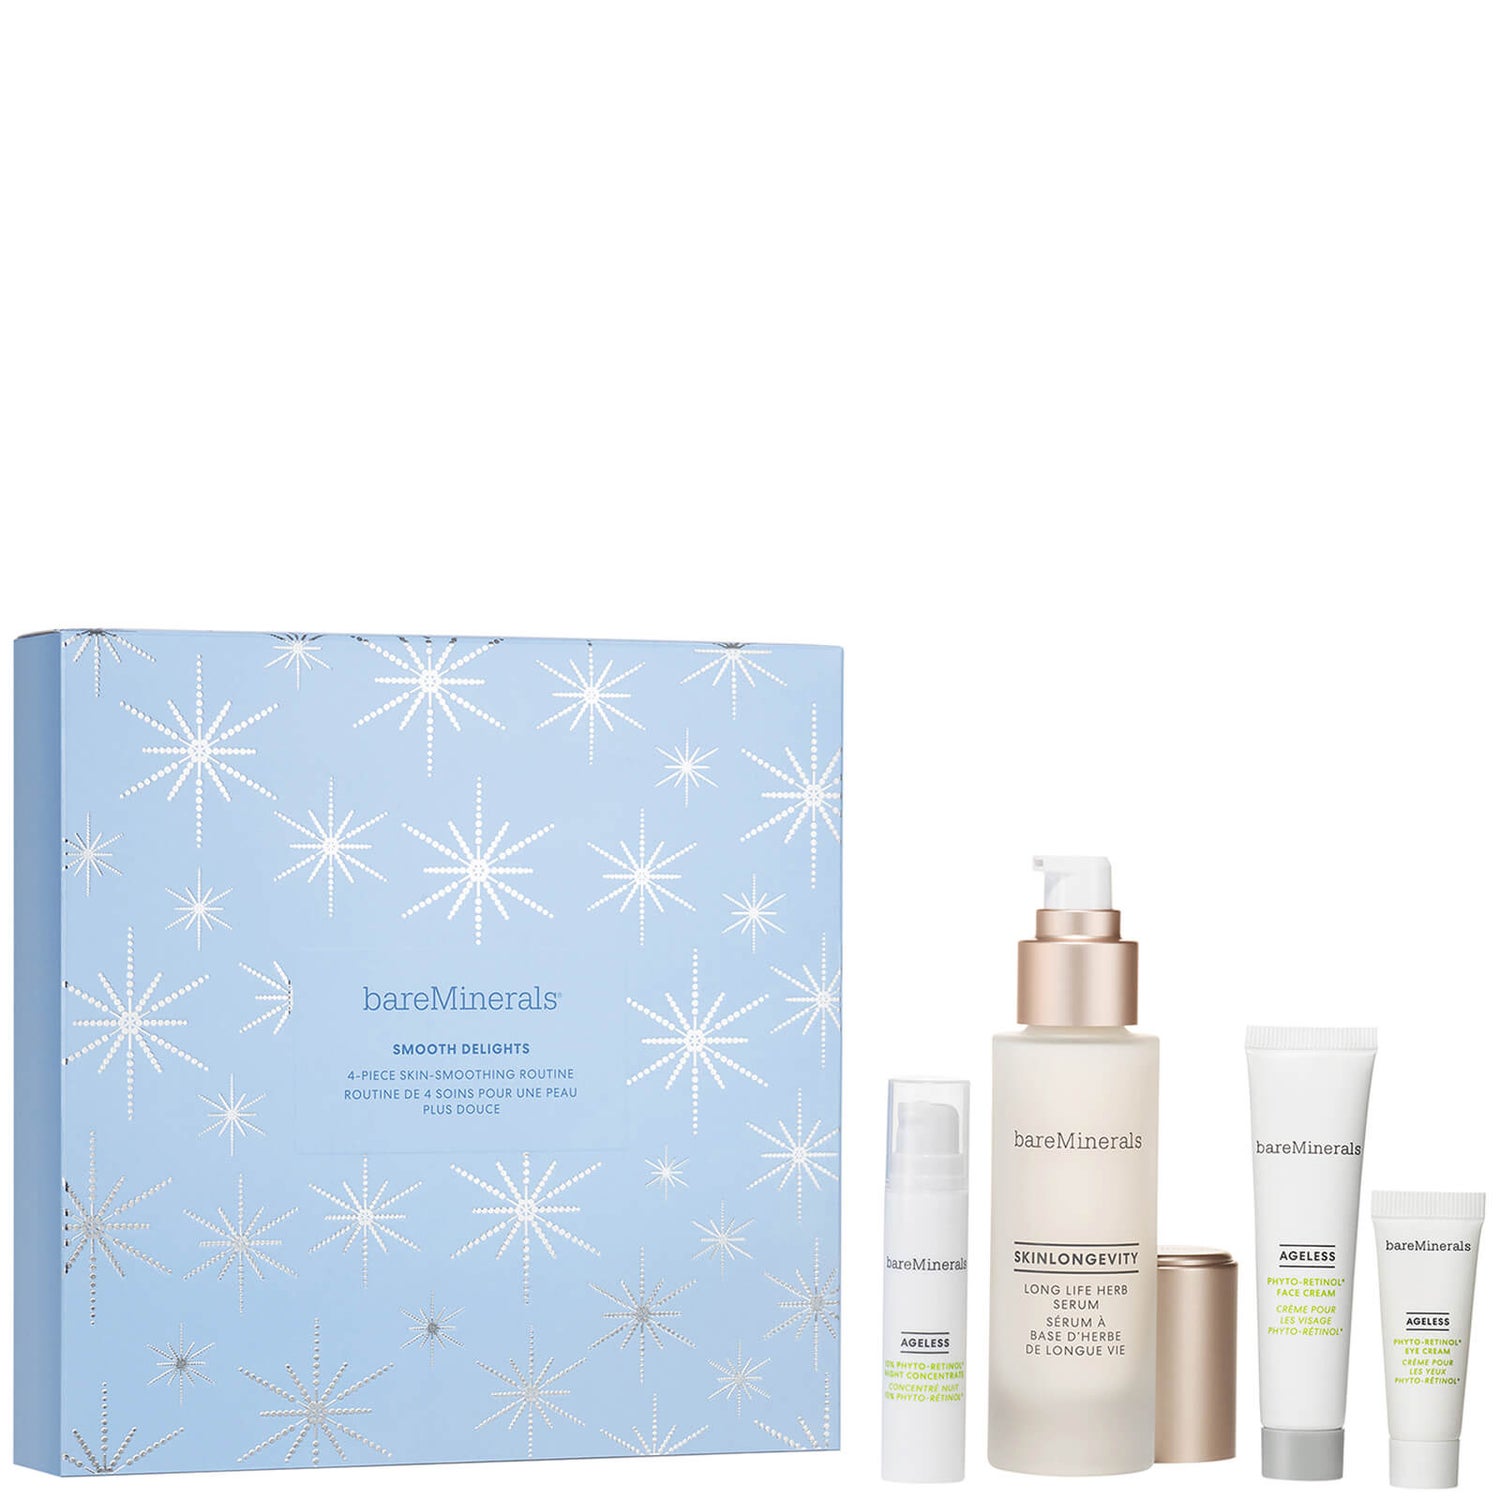 bareMinerals Smooth Delights 4-Piece Skin-Smoothing Routine